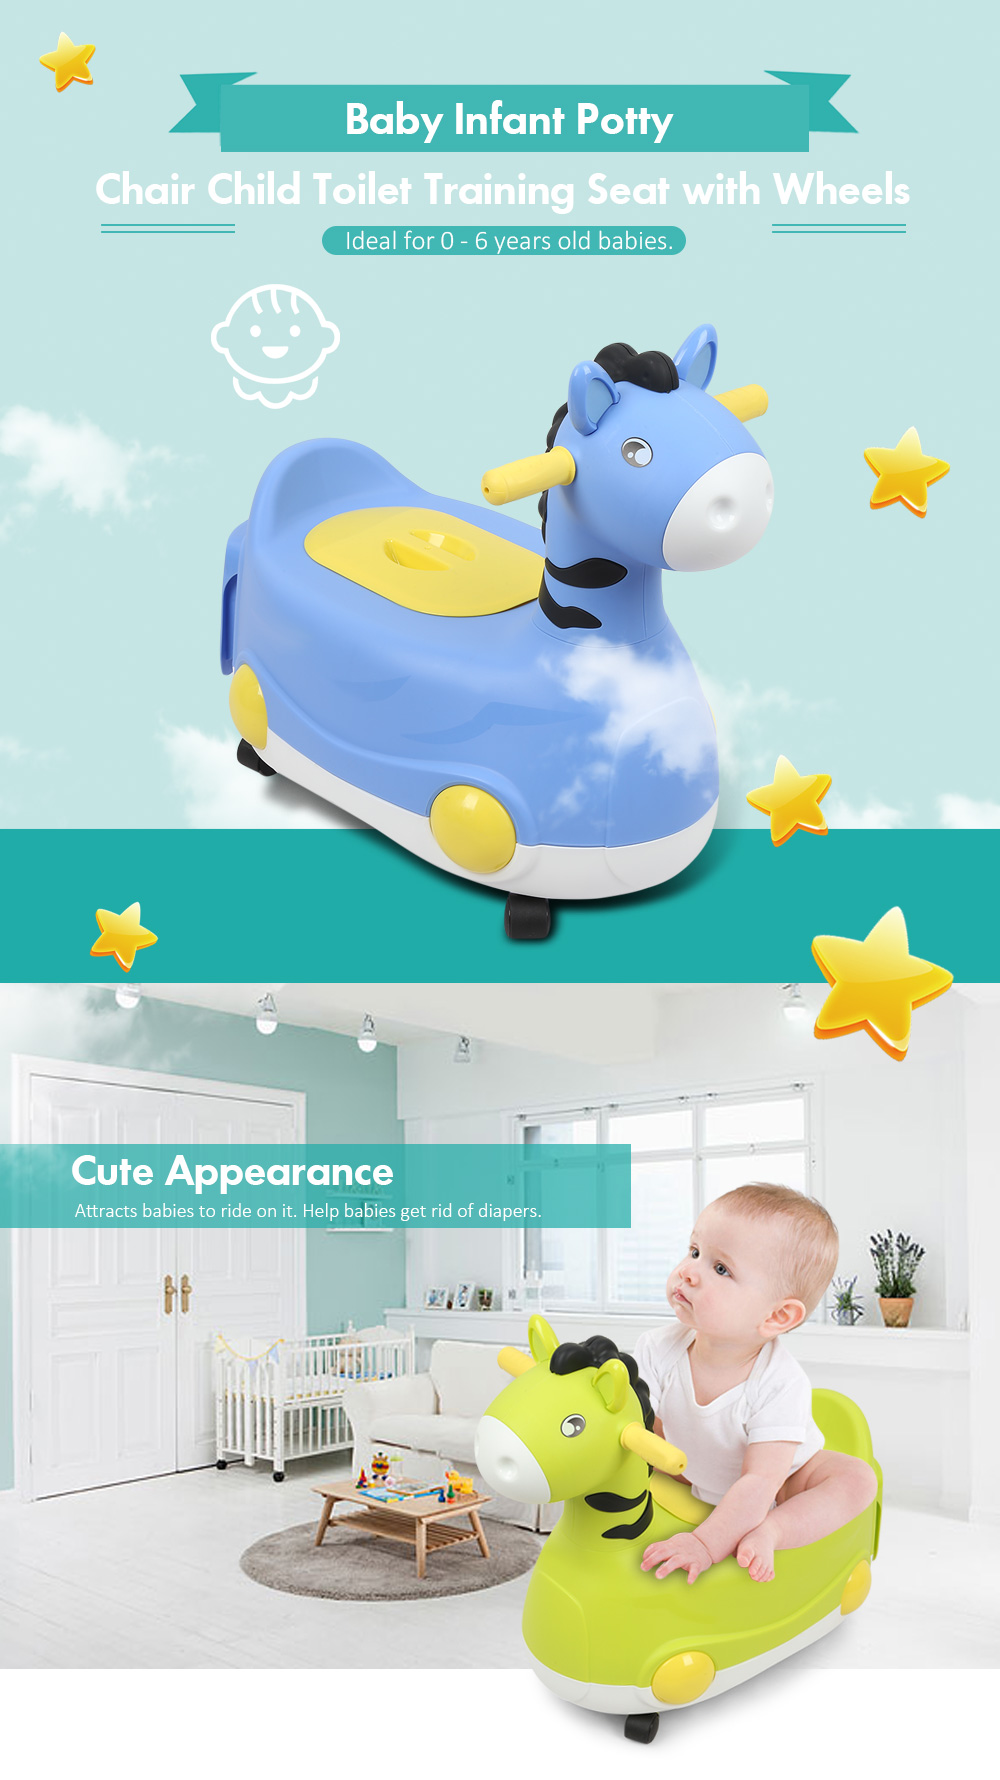 Baby Infant Potty Chair Child Toilet Training Seat PP with Wheels for Boys Girls